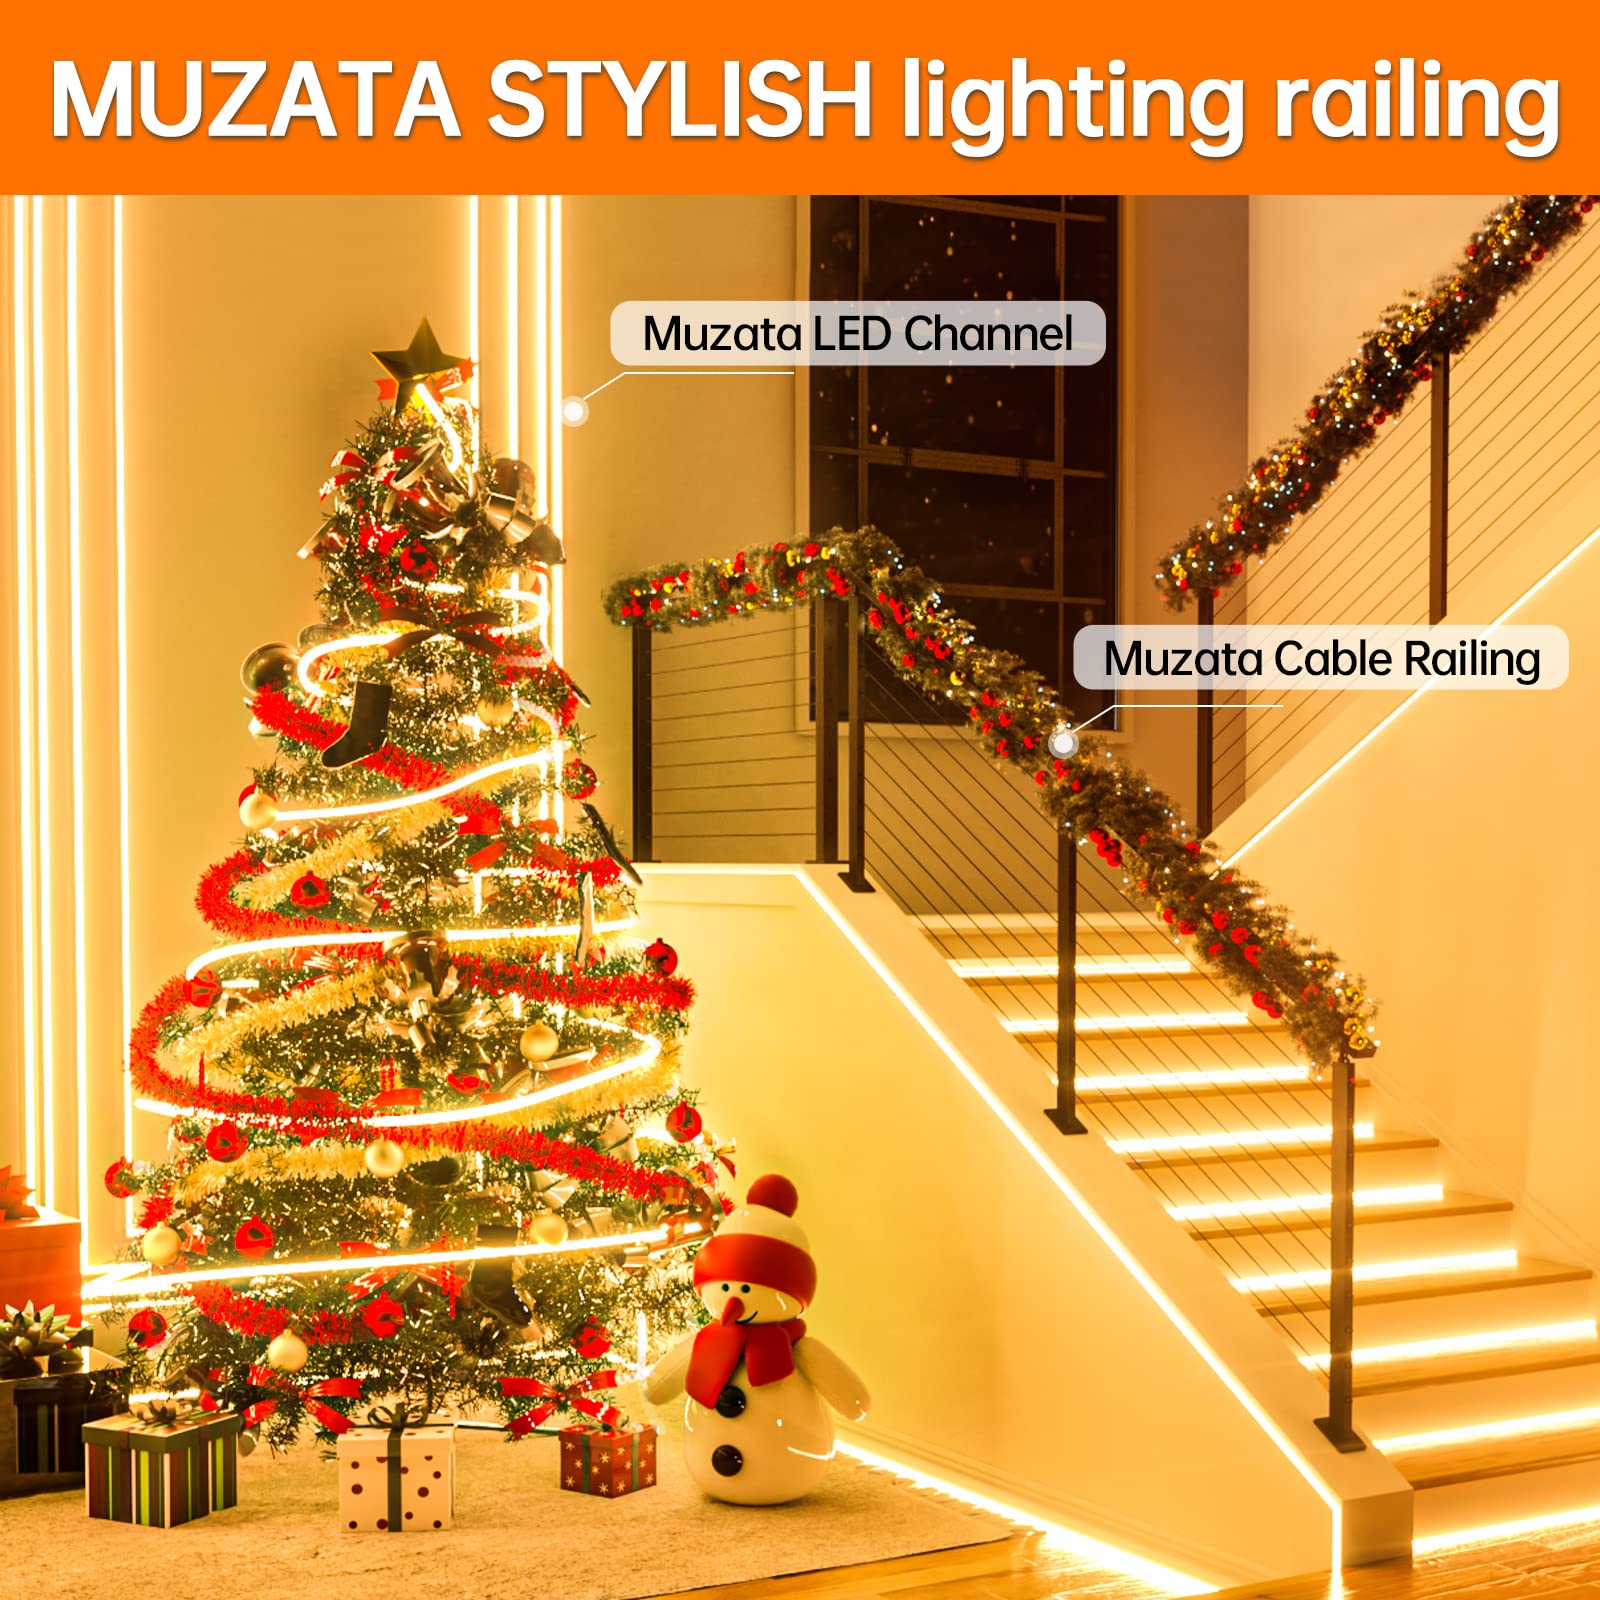 Mua Muzata 50Pack 3.3FT/1M LED Channel System with Milky White Cover Lens,Silver  Aluminum Extrusion Profile Housing Track for Strip Tape Light with U Shape  U1SW WW 1M, LU1 trên Amazon Mỹ chính